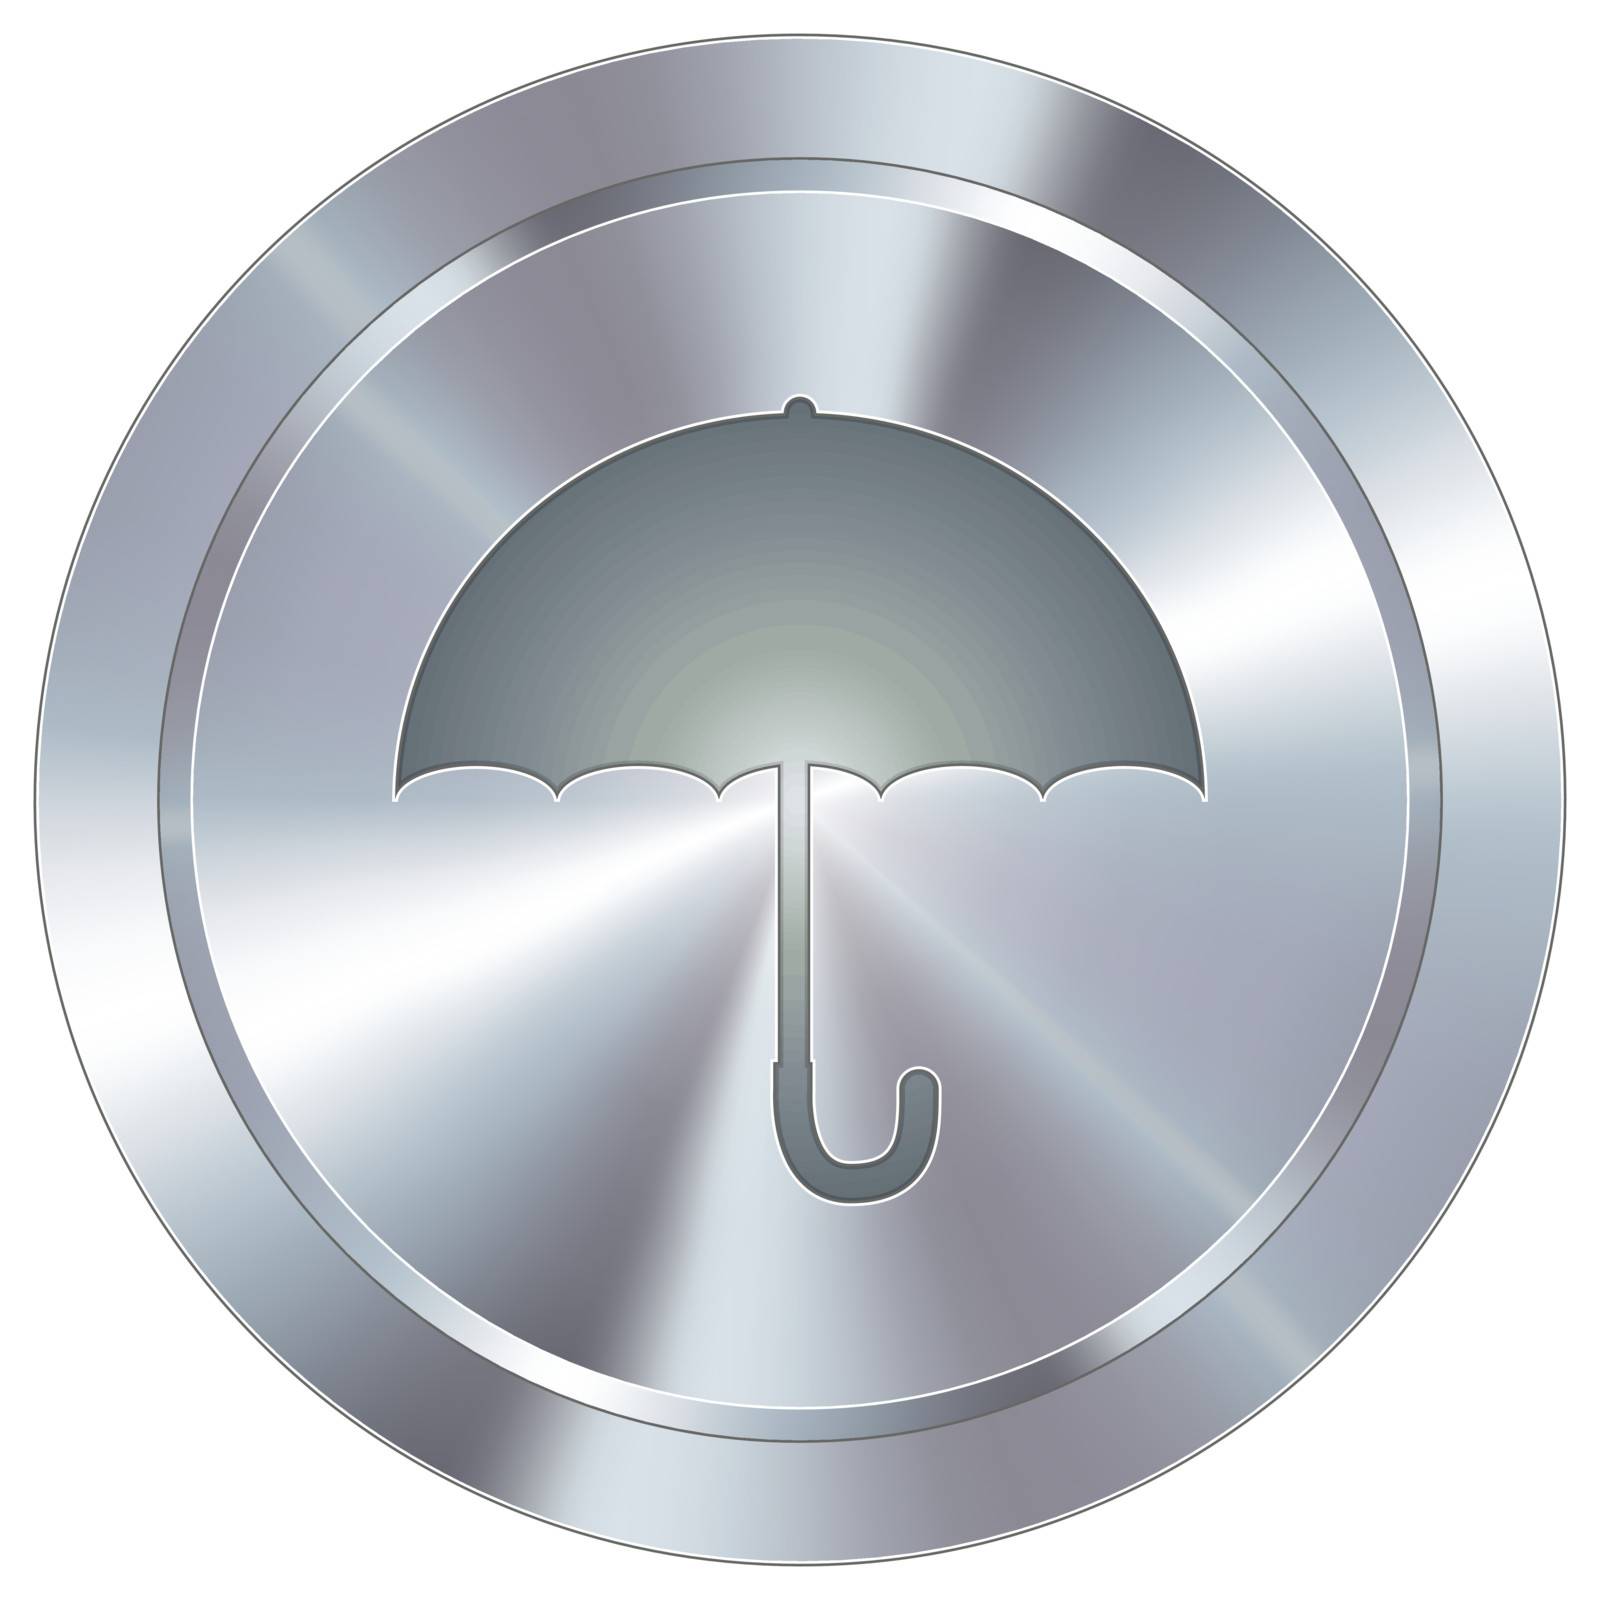 Umbrella industrial button by lhfgraphics